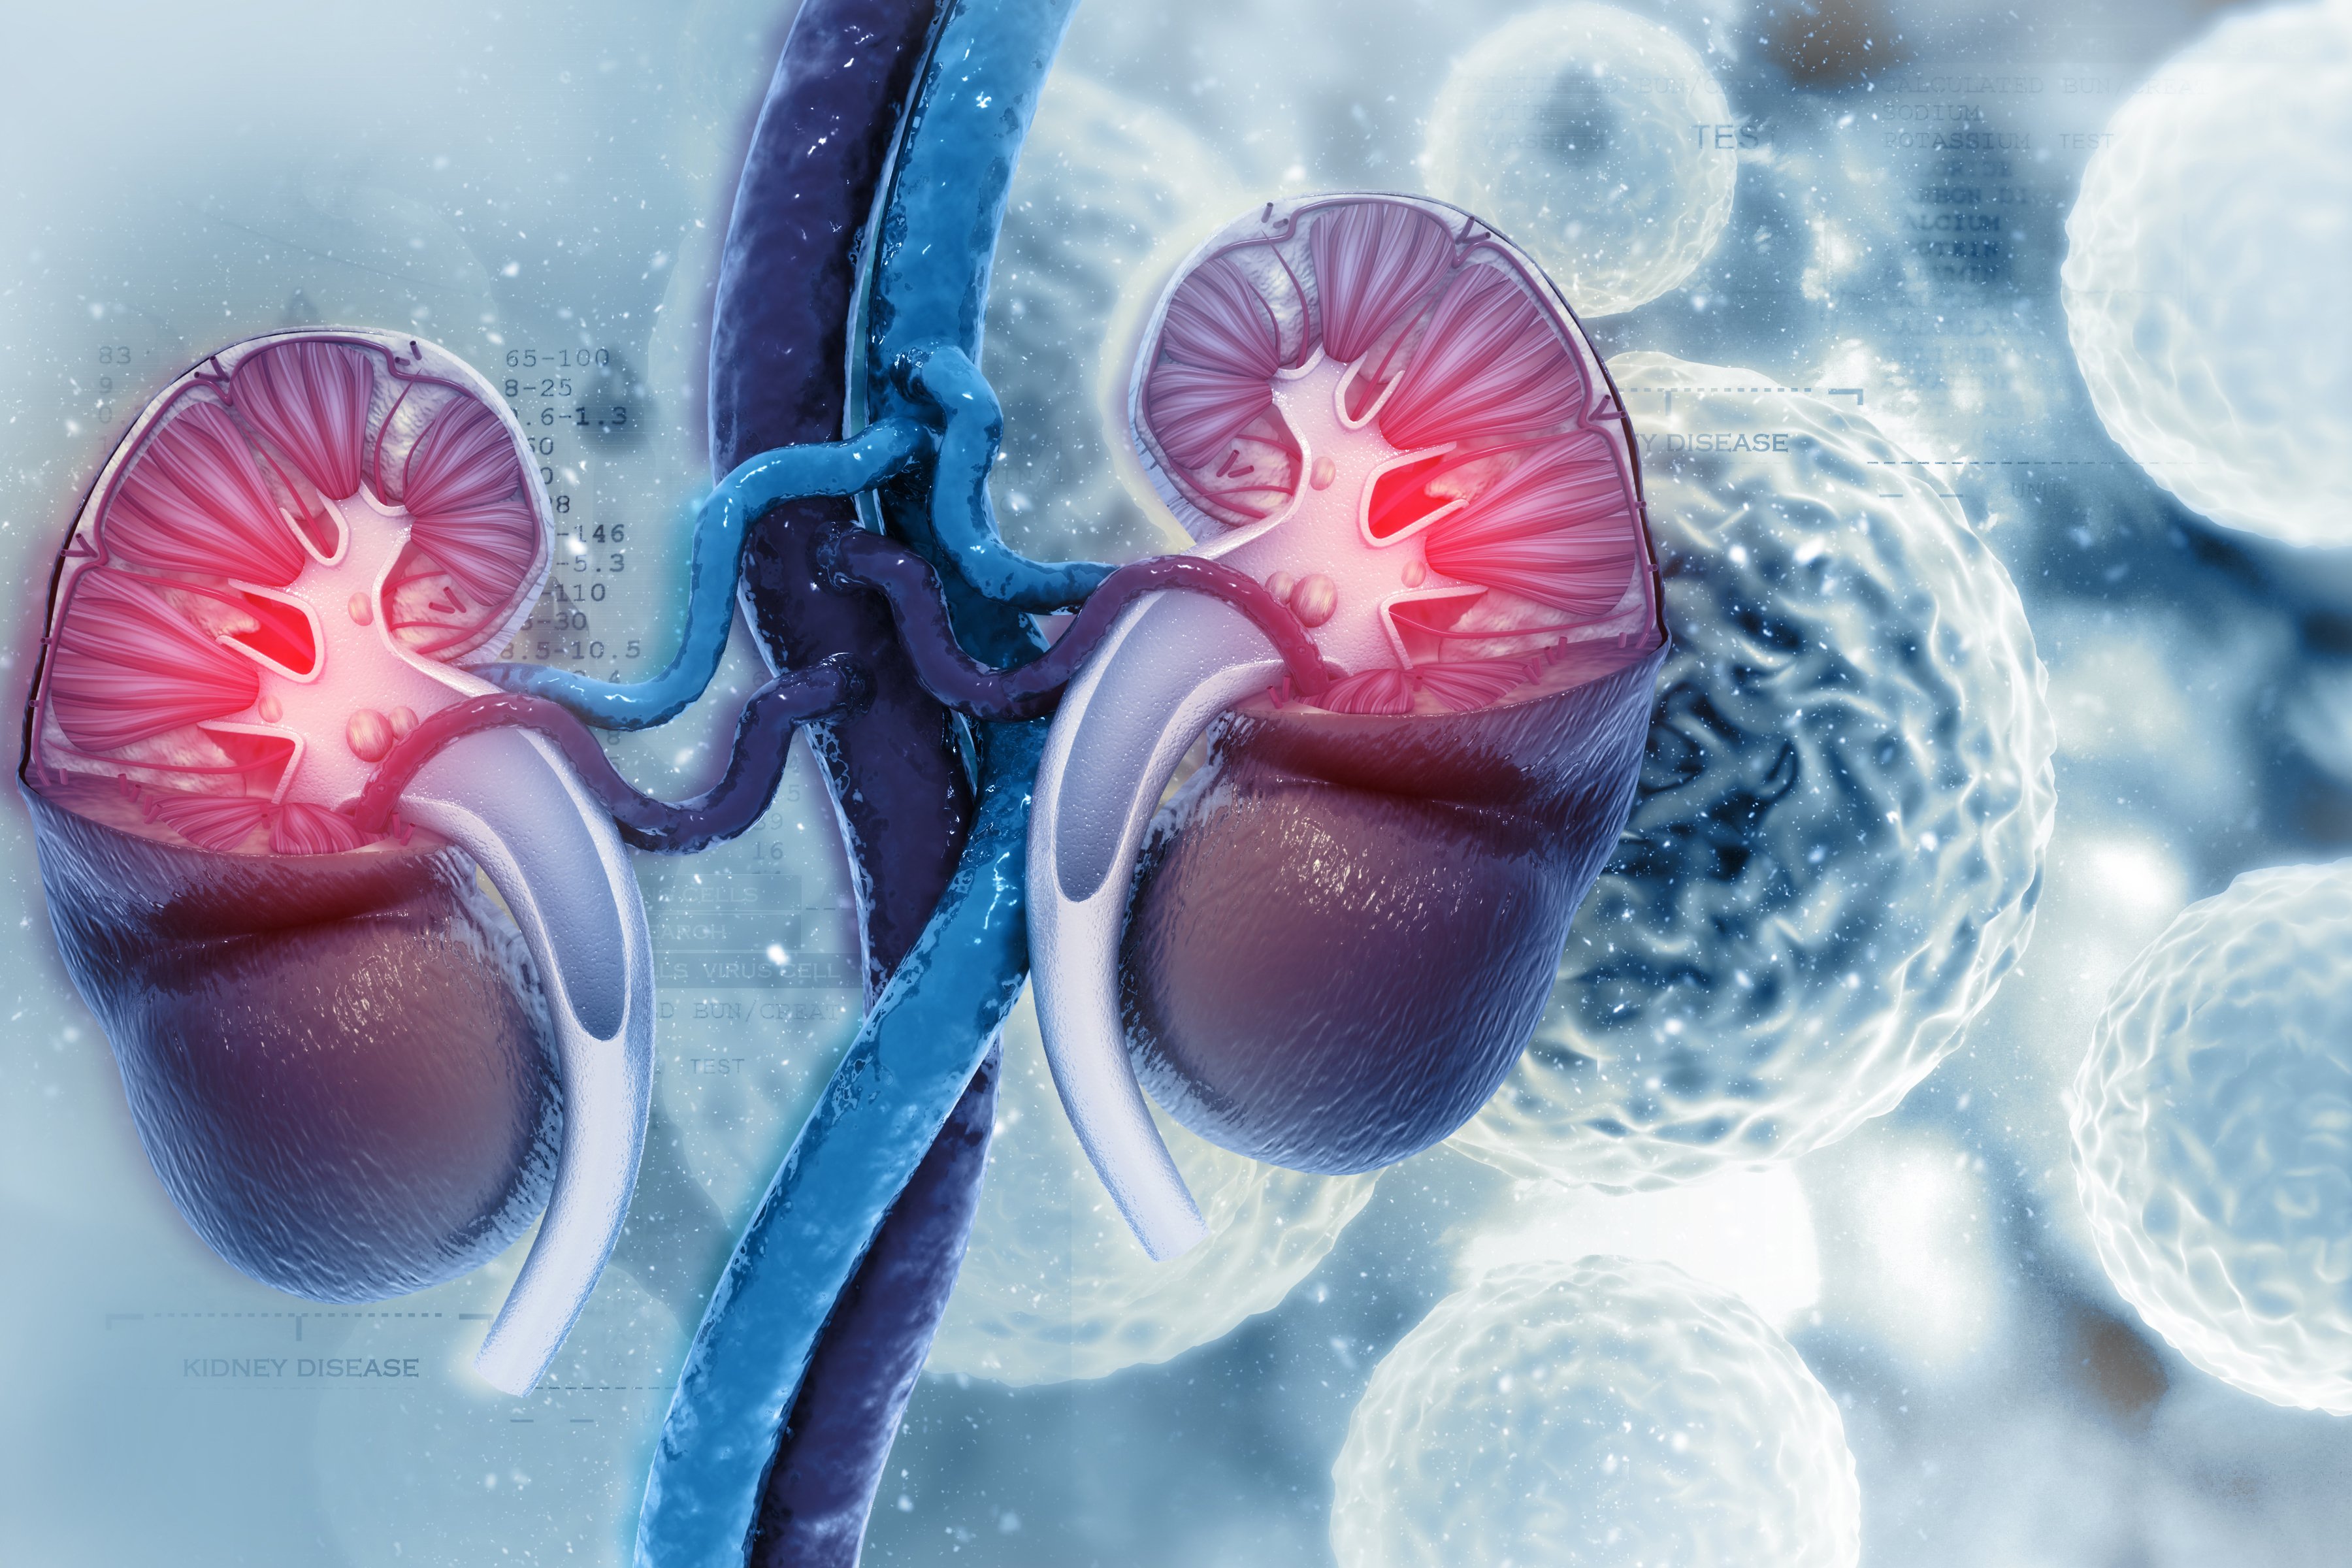  Investigators Set Their Sights on Novel Targets in Genitourinary Malignancies